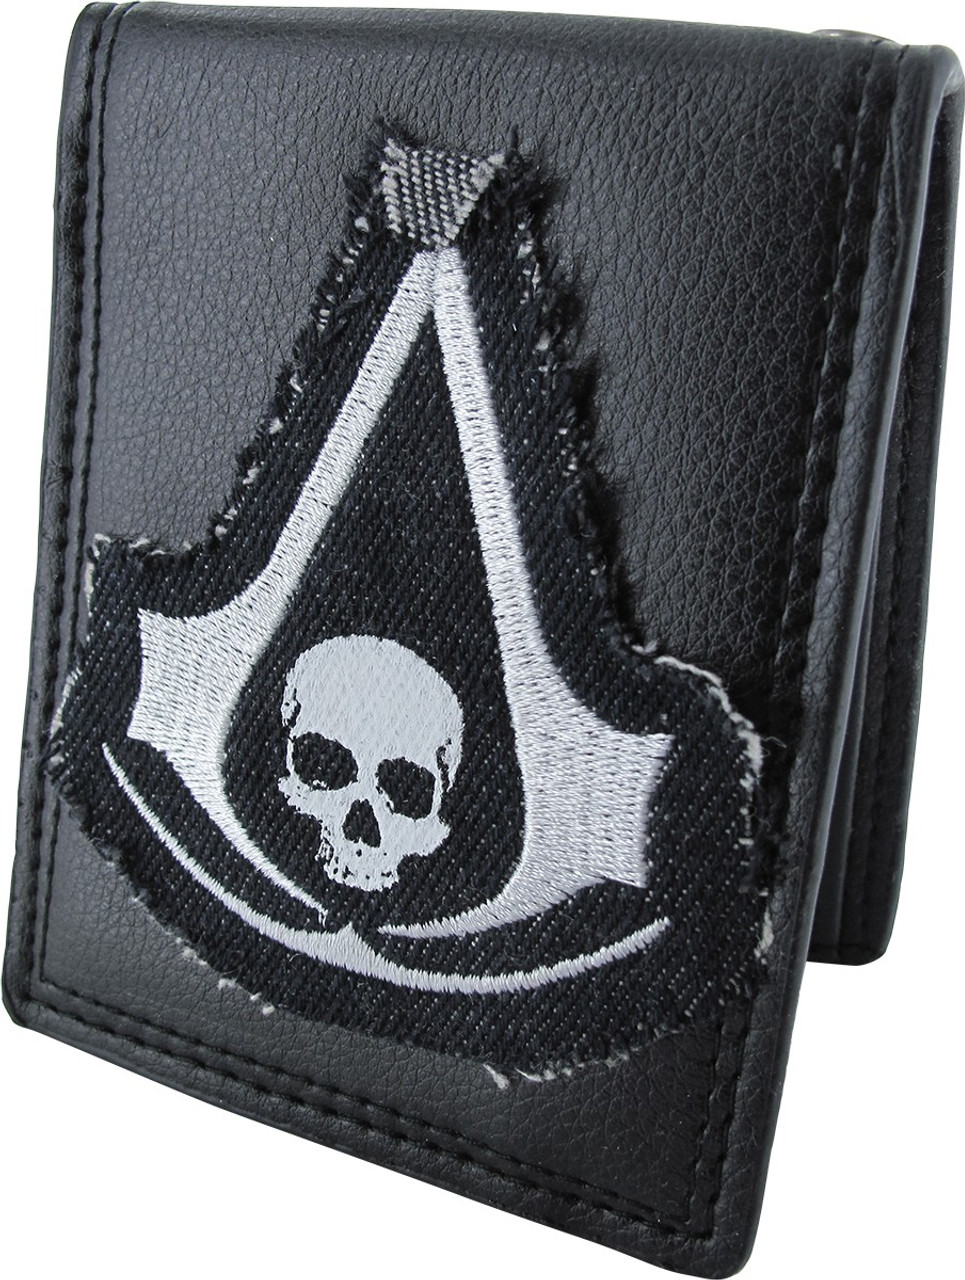 NEW OFFICIAL ASSASSINS CREED BLACK FLAG WHITE ID & CARD BI-FOLD WALLET 